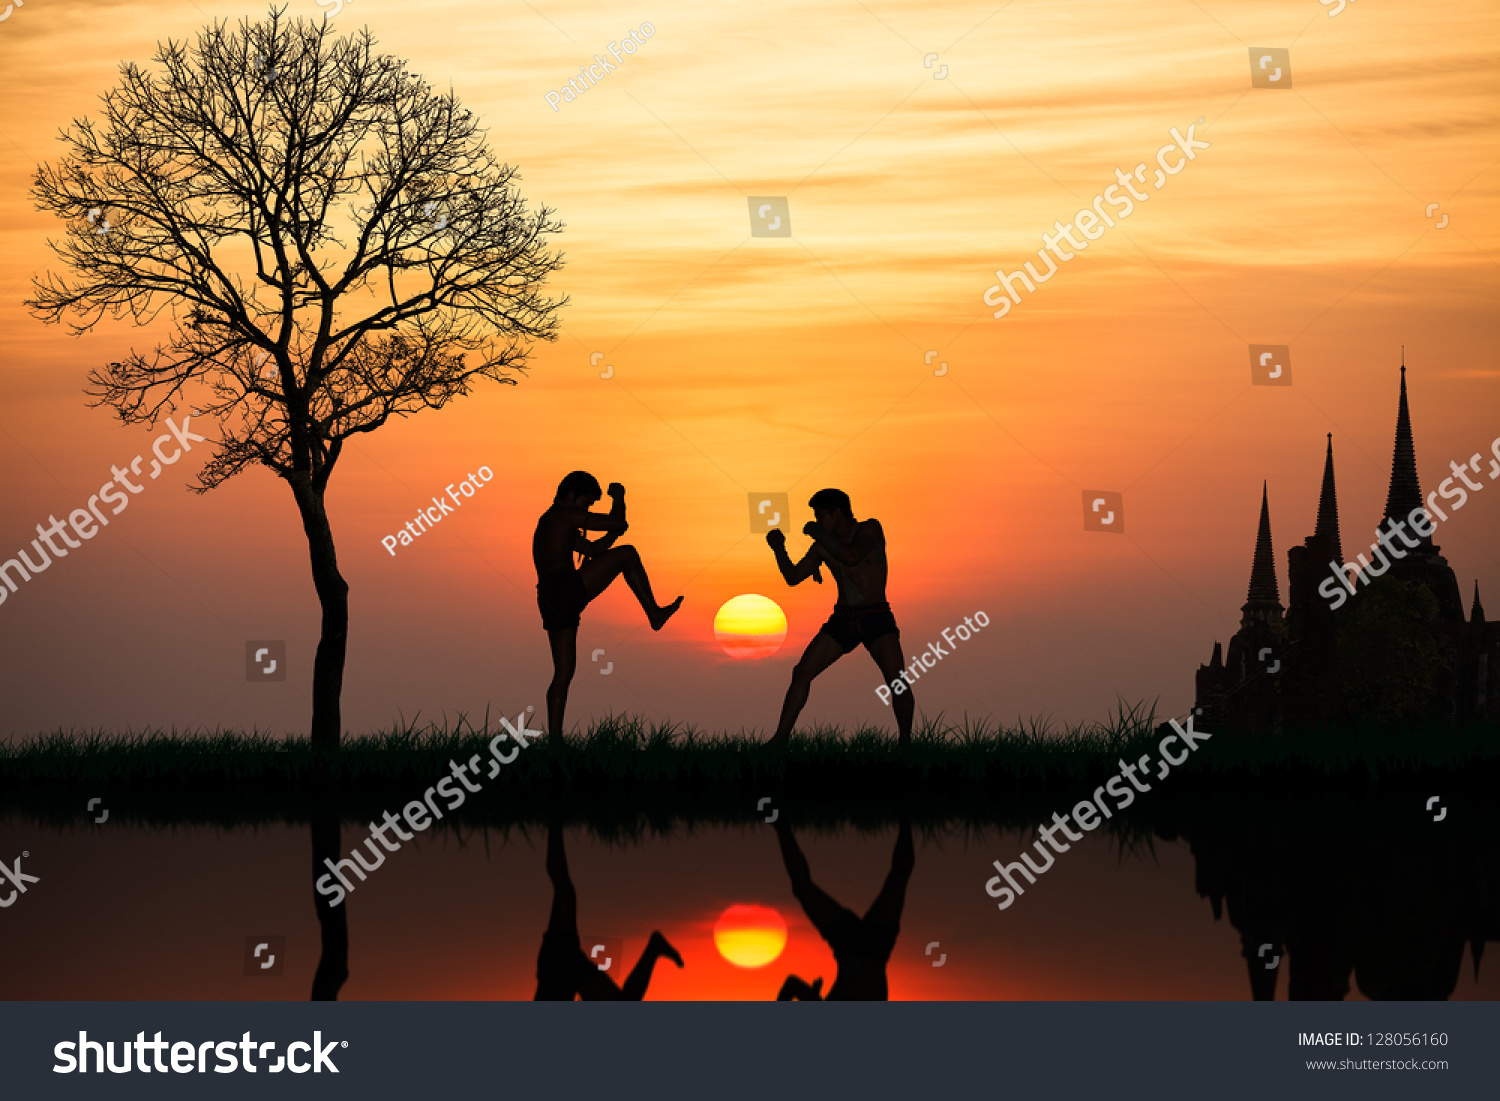 Silhouette of a thai's boxing at sunset #128056160